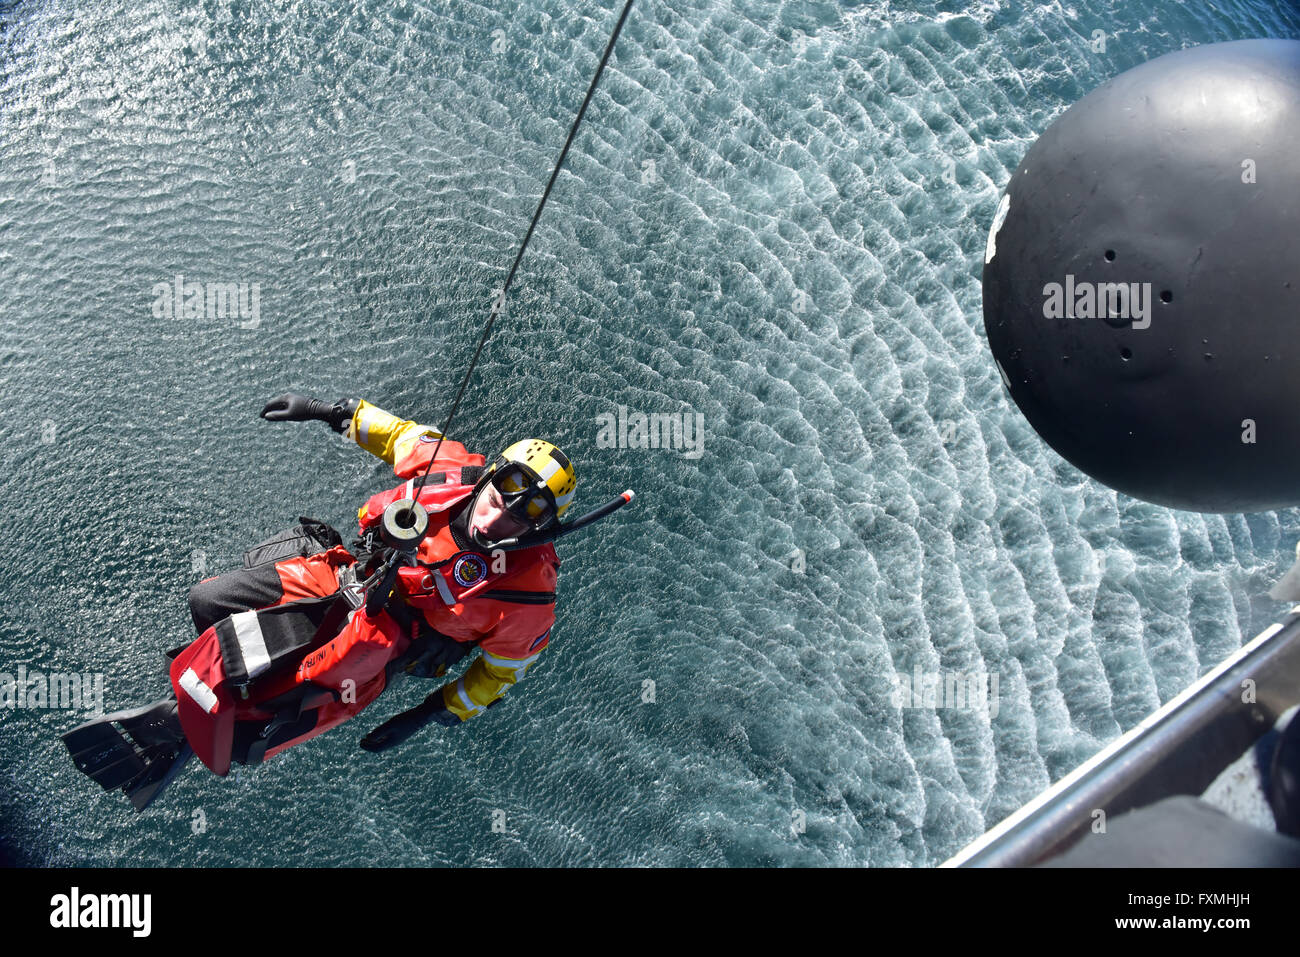 A US Coast Guard Rescue swimmer is hoisted from the water into a MH-60 Jayhawk Helicopter during rescue training in the Pacific Ocean January 12, 2016 near San Diego, California. Stock Photo